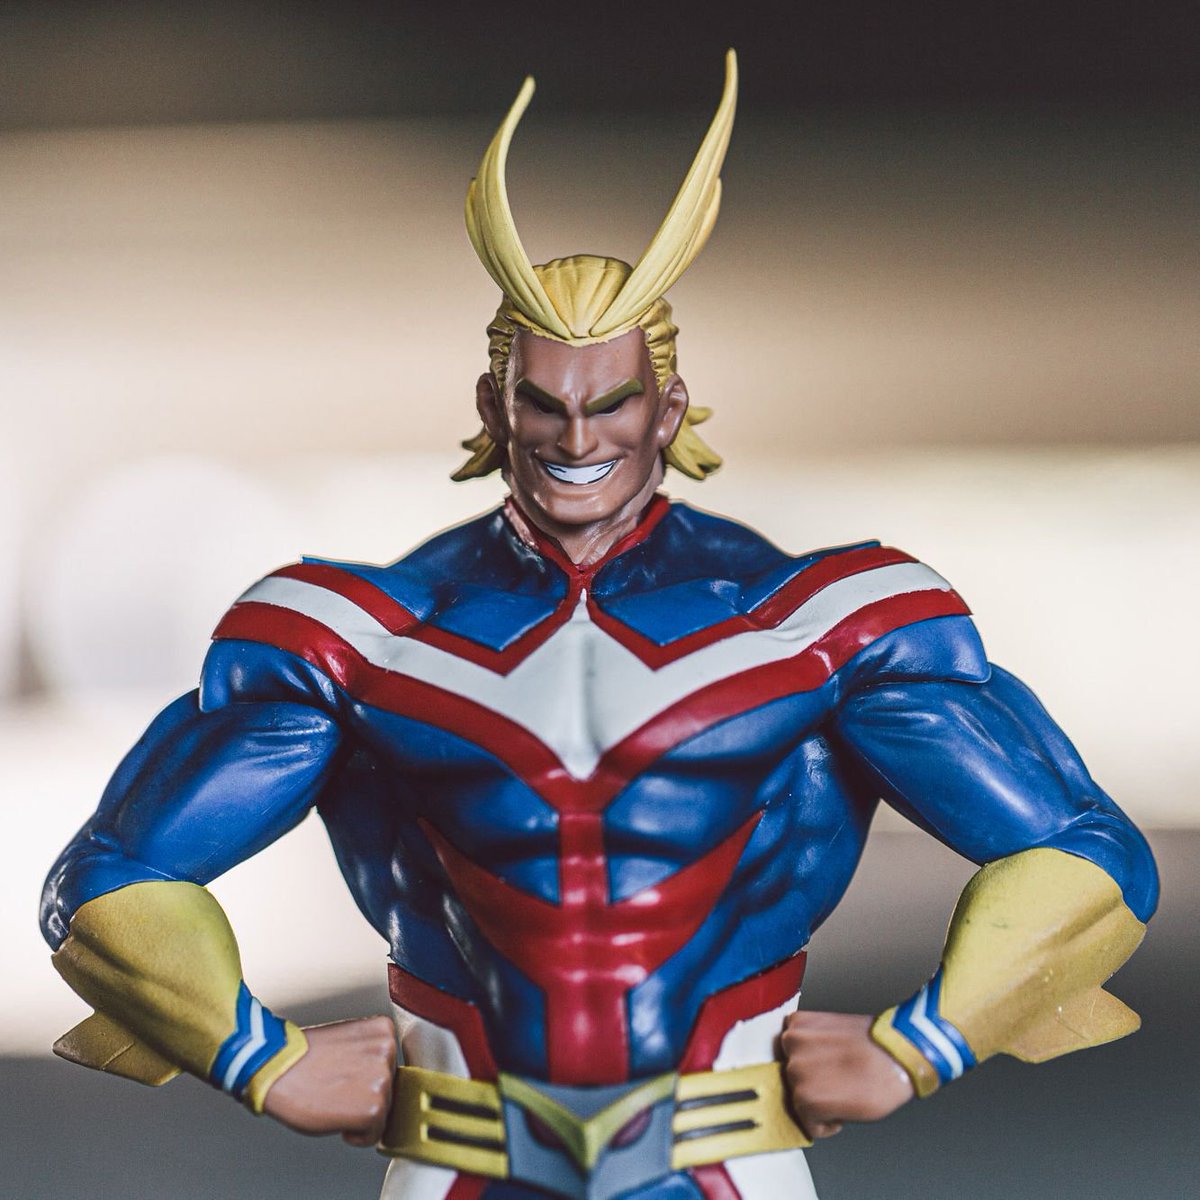 Bait The Banpresto My Hero Academia Age Of Heroes Vol 1 All Might Figure Is Available Now Online At T Co Tdhdbrzlxo T Co Spbcxc7r3b